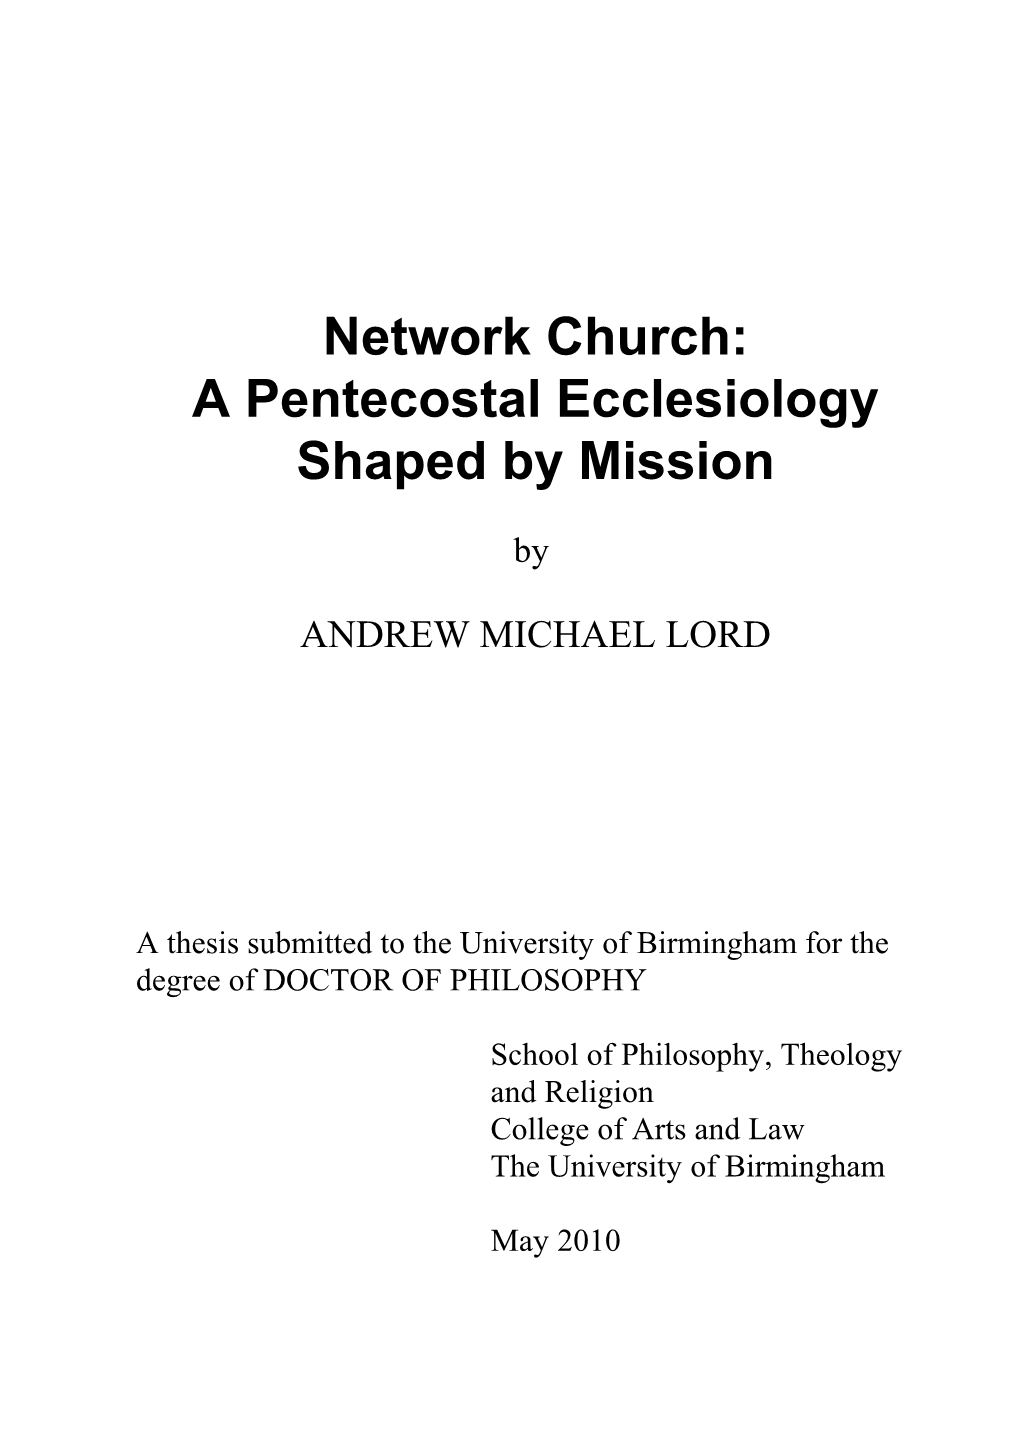 Network Church: a Pentecostal Ecclesiology Shaped by Mission